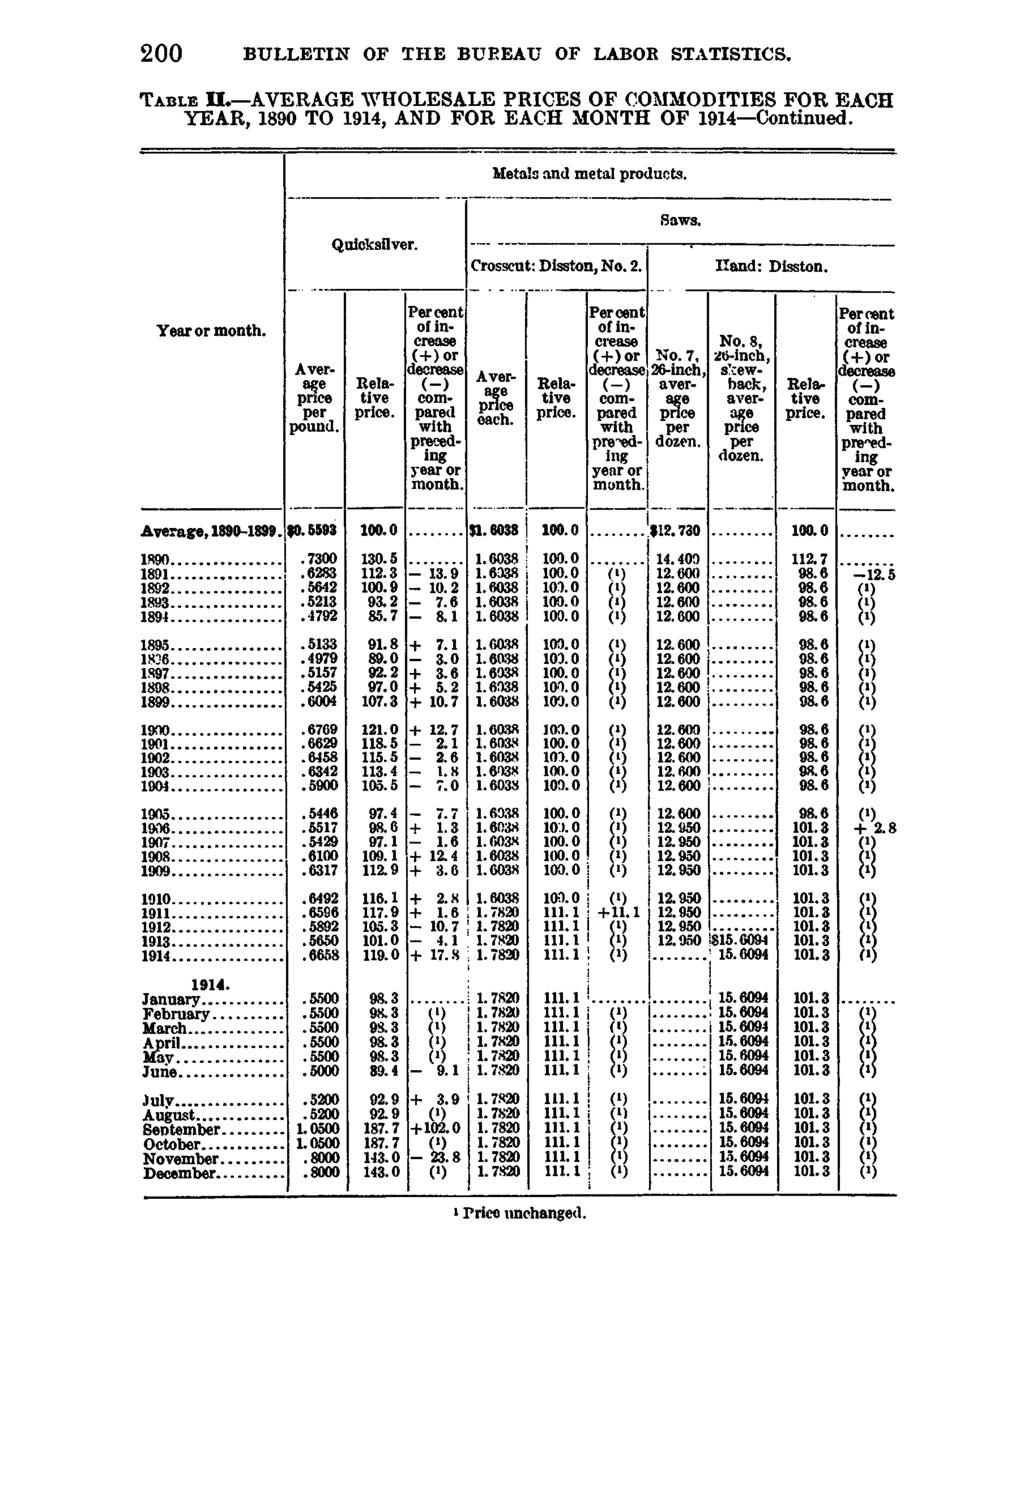 200 B U L L E T IN OF T H E B U R E A U OF LABO R S T A T IS T IC S. T a b l e II. AVERAGE WHOLESALE PRICES OF COMMODITIES FOR EACH YEAR, 1890 TO 1914, AND FOR EACH MONTH OF 1914 Continued.